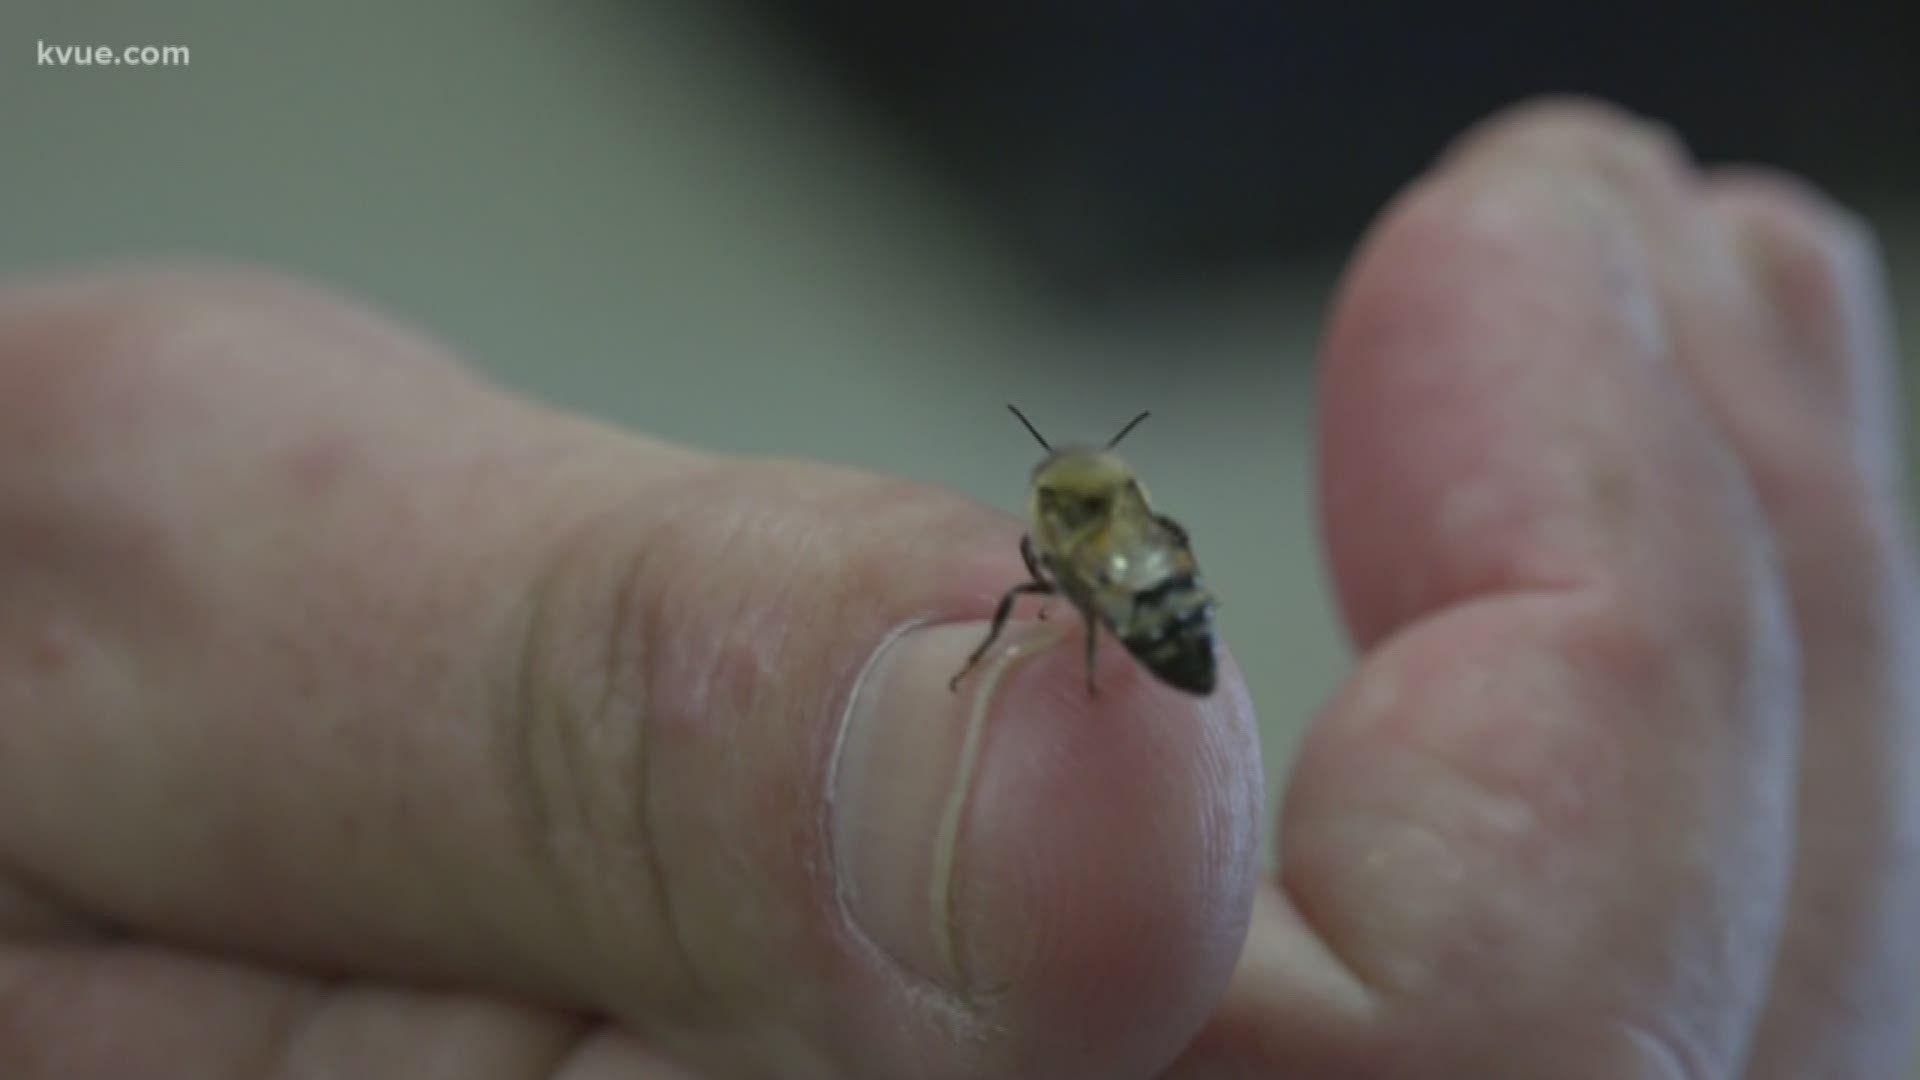 Austin City Council measure to protect bees